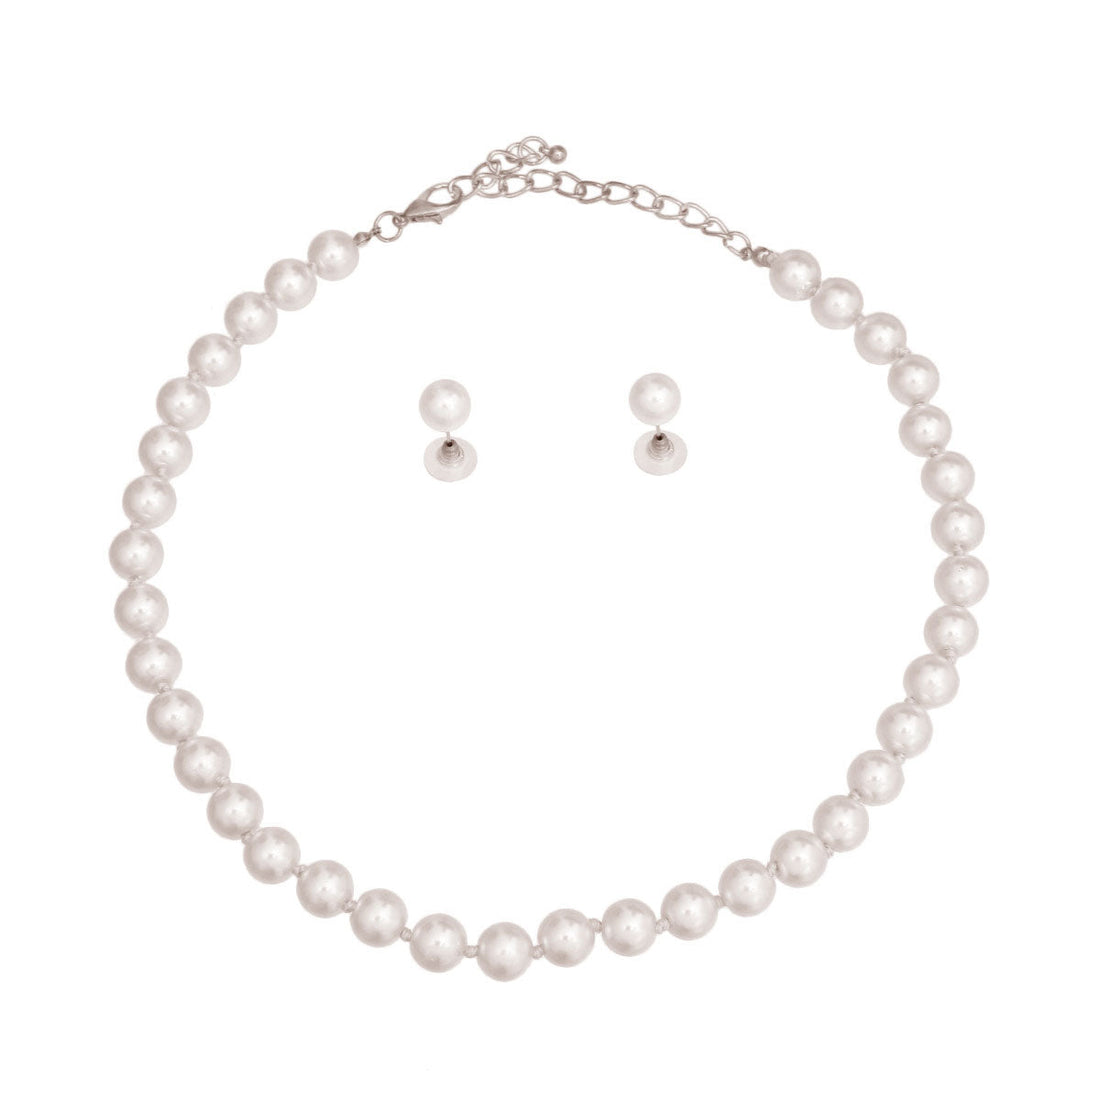 10mm White Glass Pearl Necklace